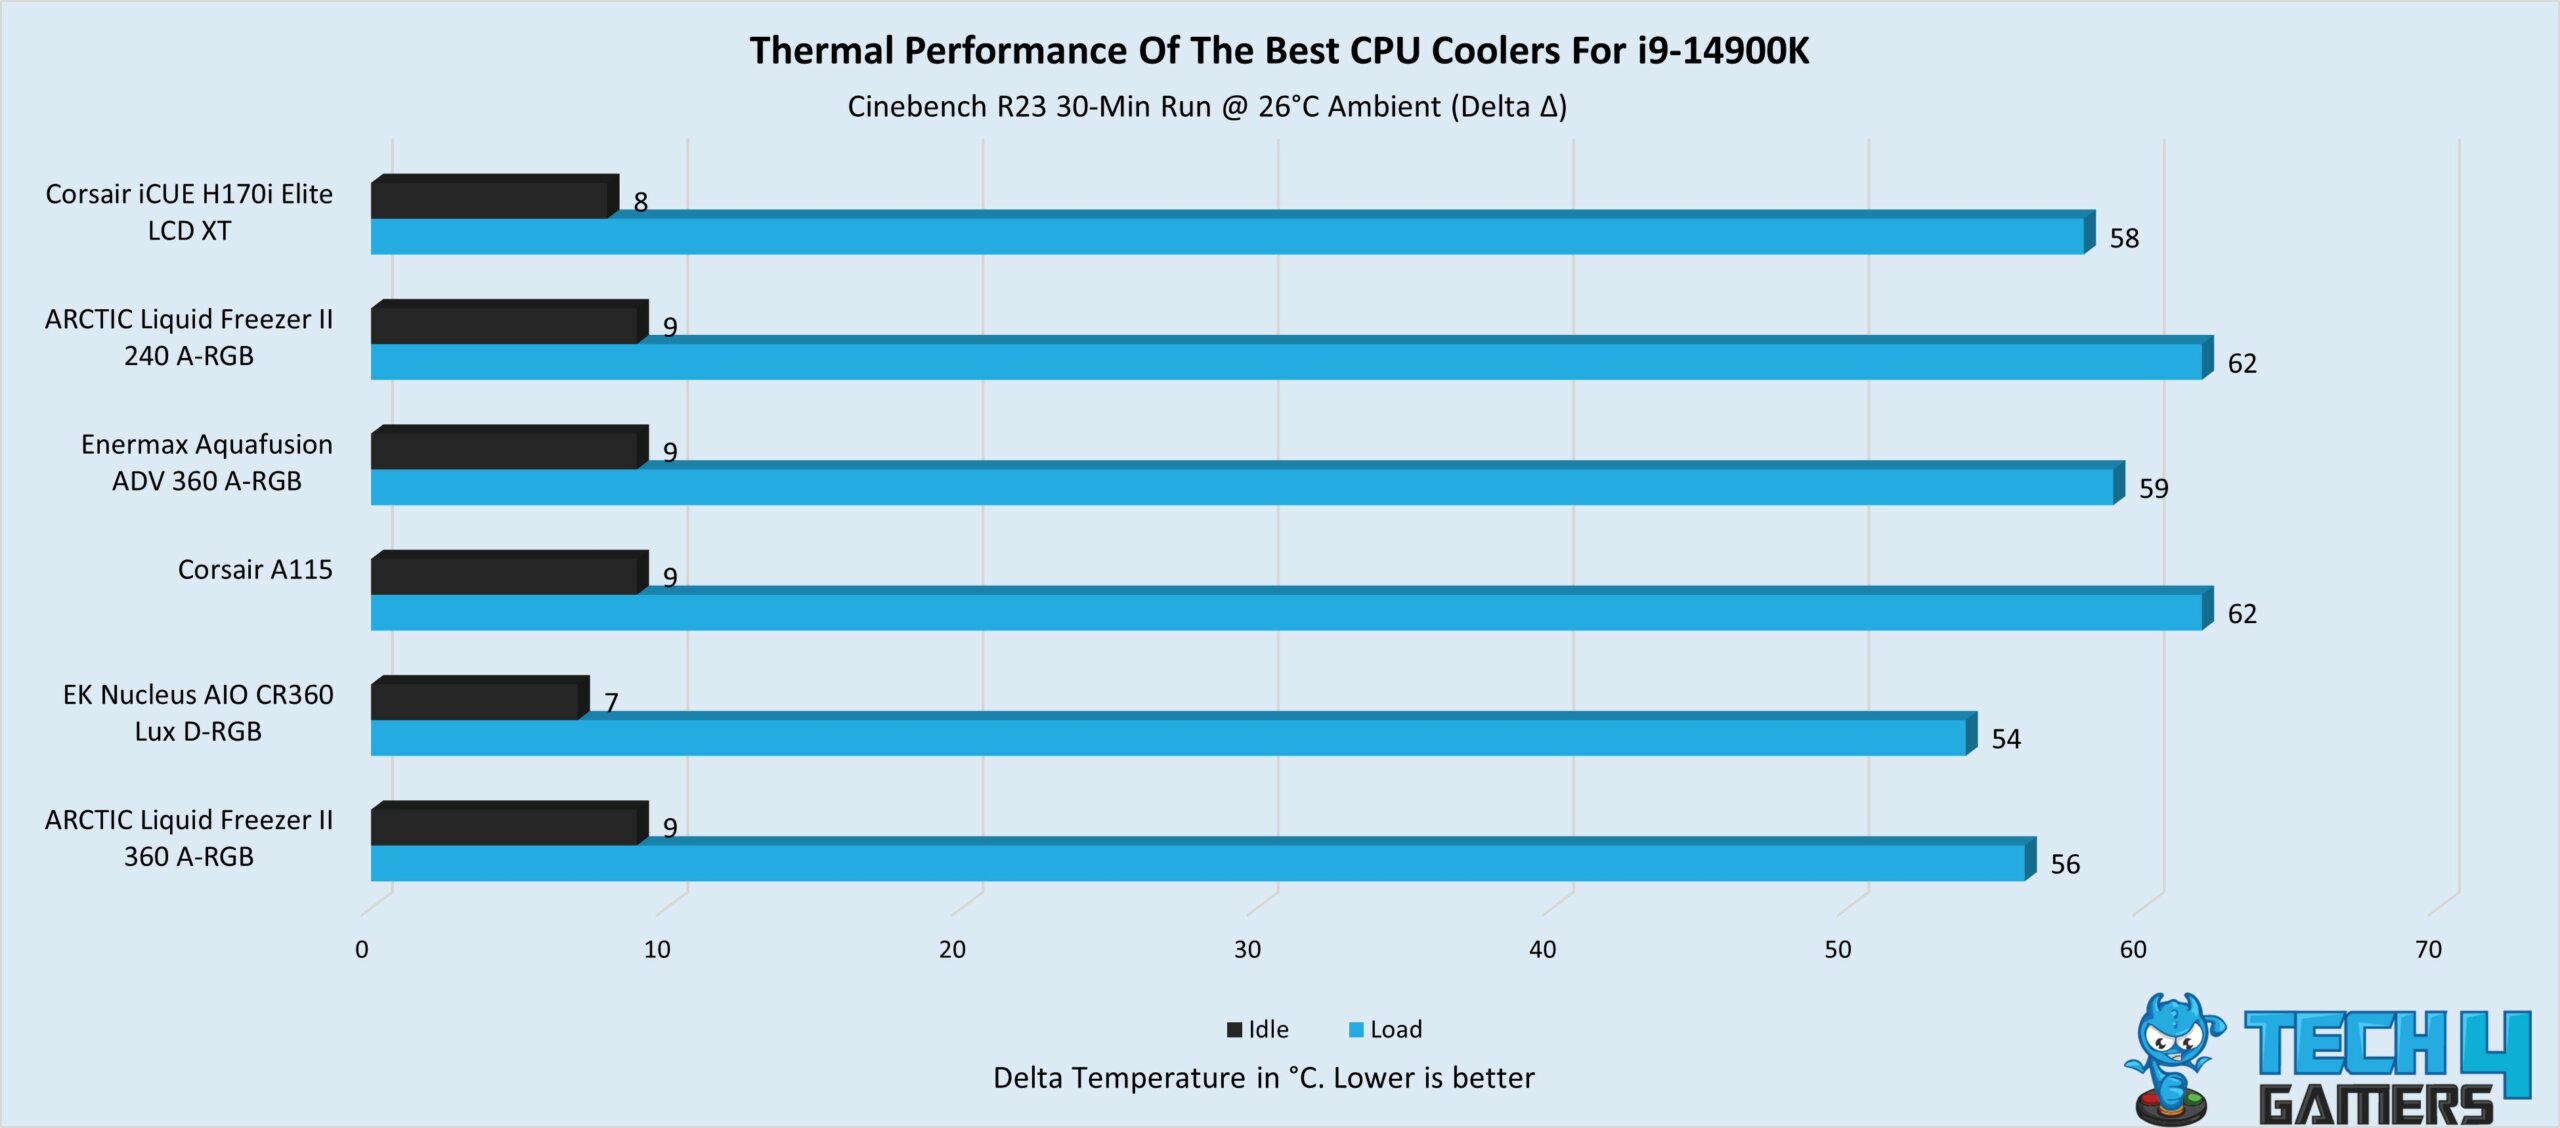 Thermal performance of best CPU coolers for the Intel Core i9-14900K CPU